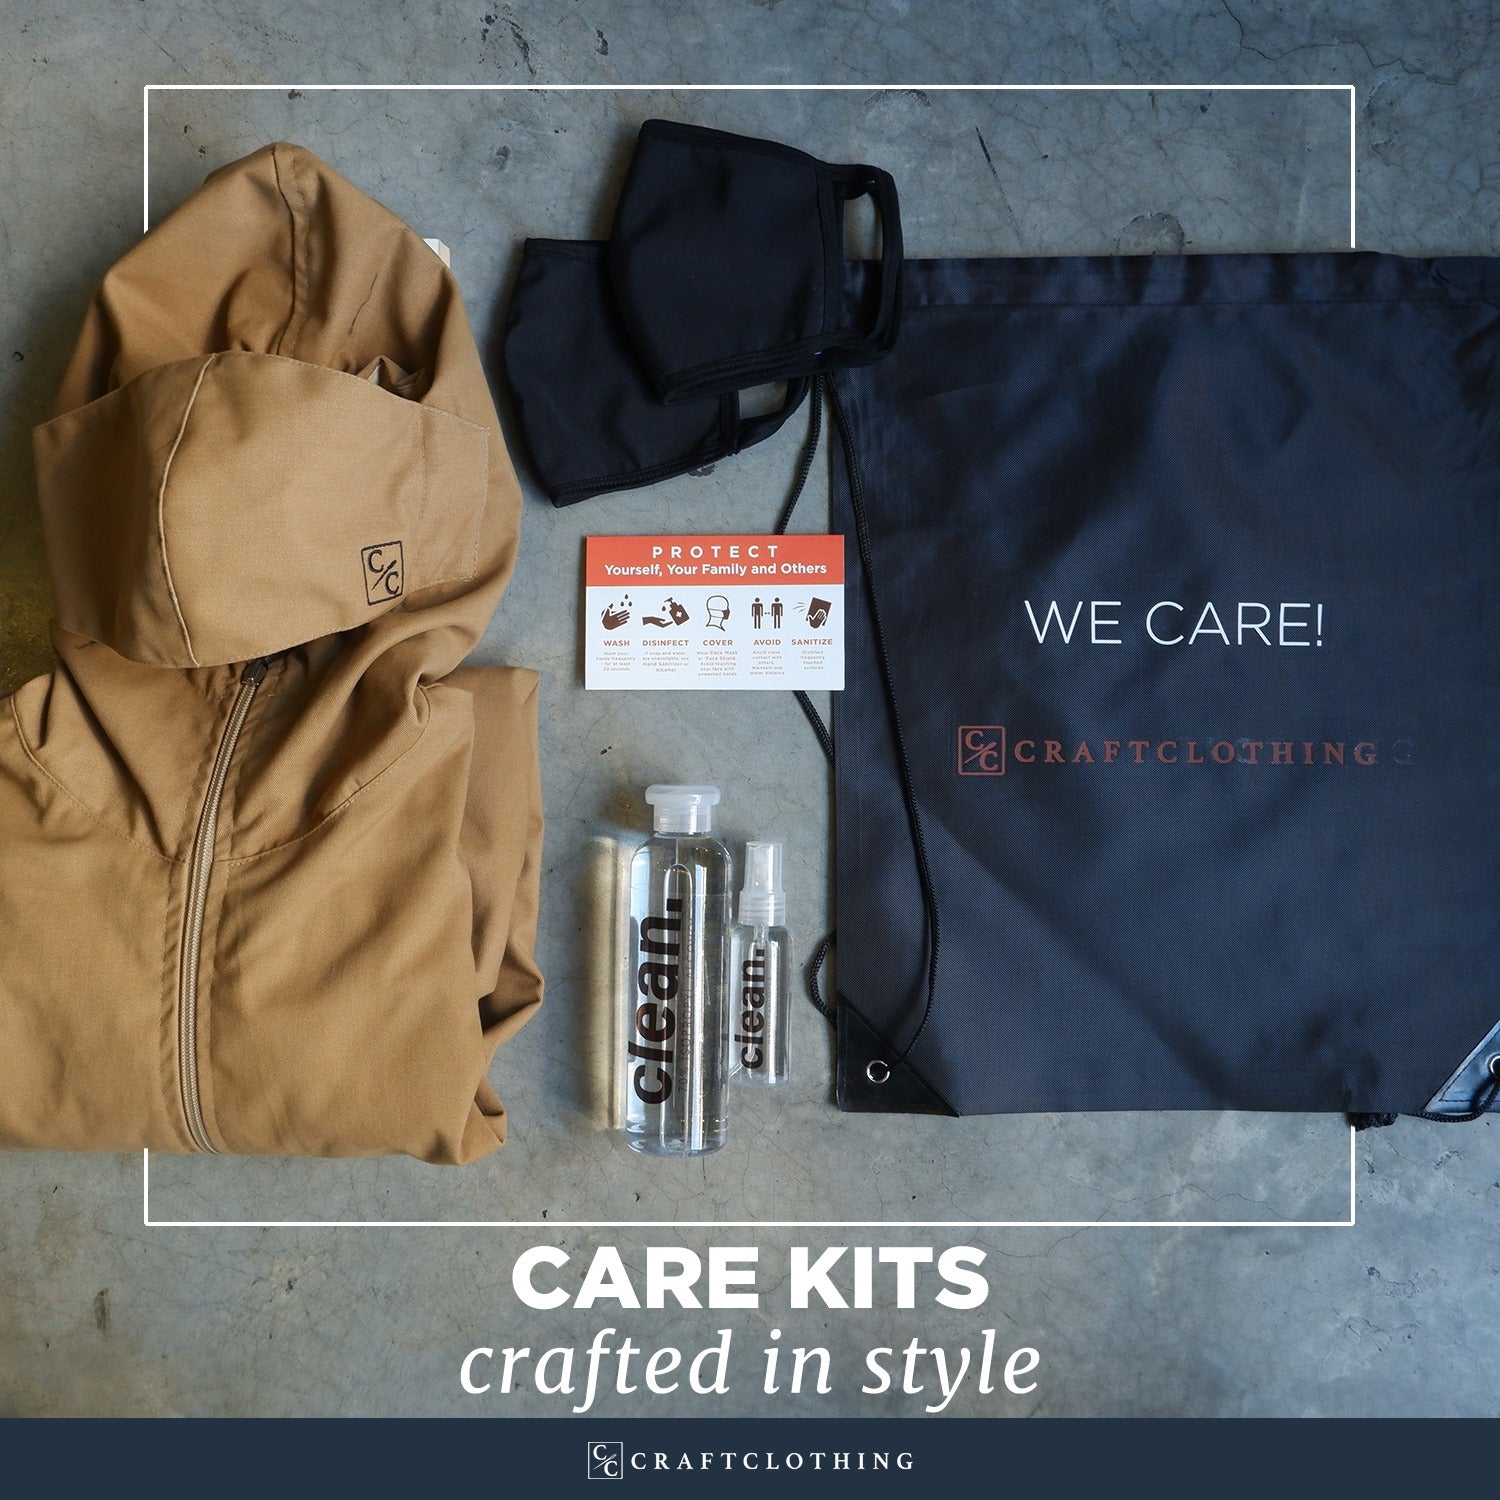 Care Kits crafted in style.